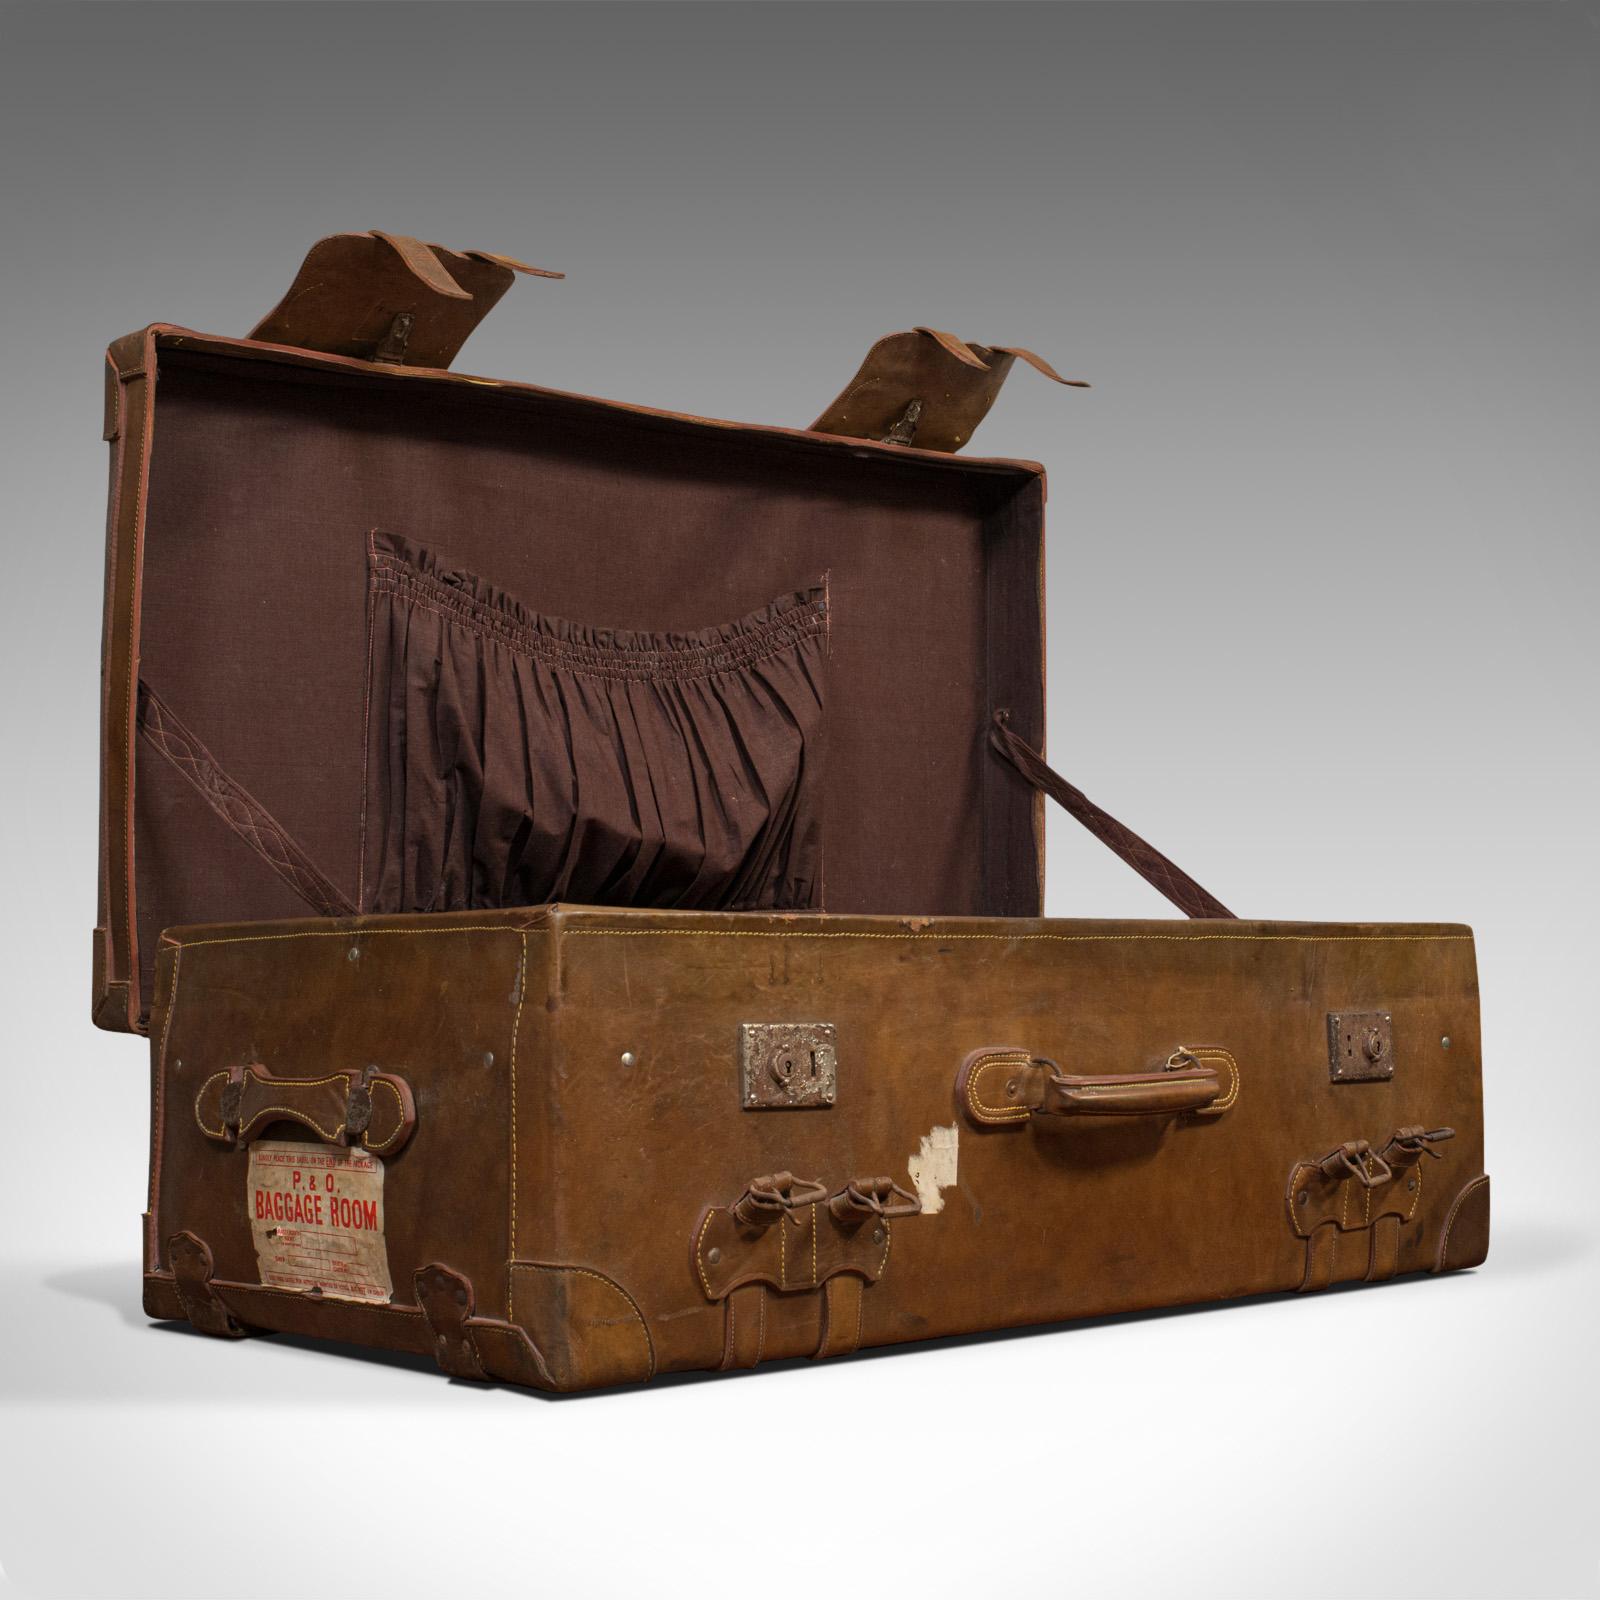 This is a very large travel suitcase. An English, leather steamer or shipping trunk, dating to the late Victorian period, circa 1900.

Generously sized for the grandest of tours
Displays a desirable aged patina
Rich, sturdy leather in delightful